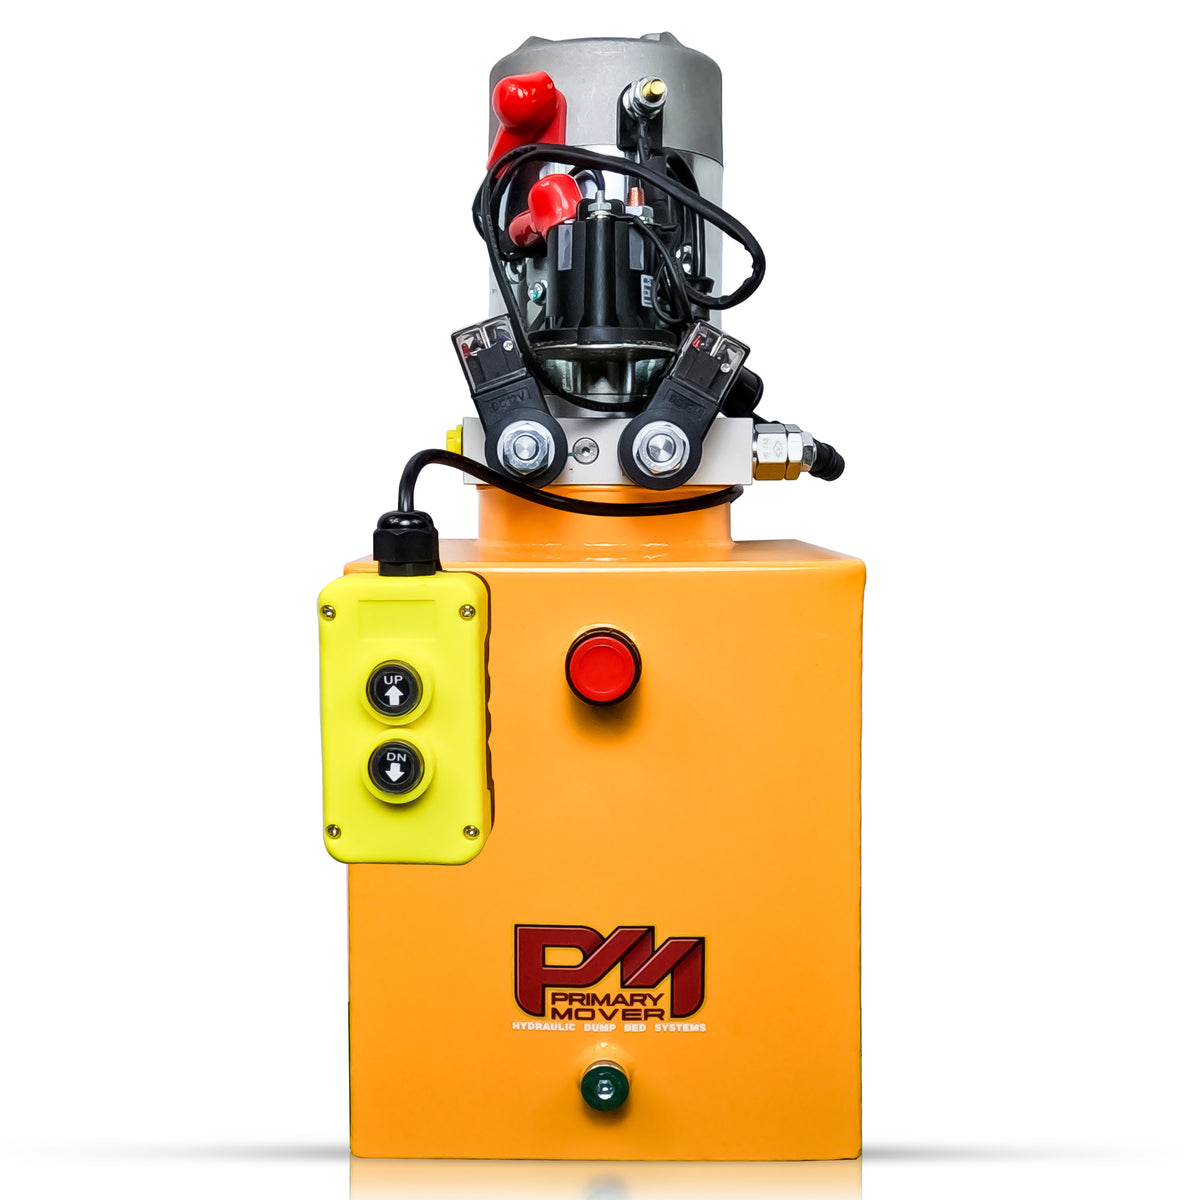 Primary Mover Double Acting 12VDC Hydraulic Power Unit with Precision Lift and Descent, Tailored for Dump Bed Systems, Crafted for Durability and Affordability.